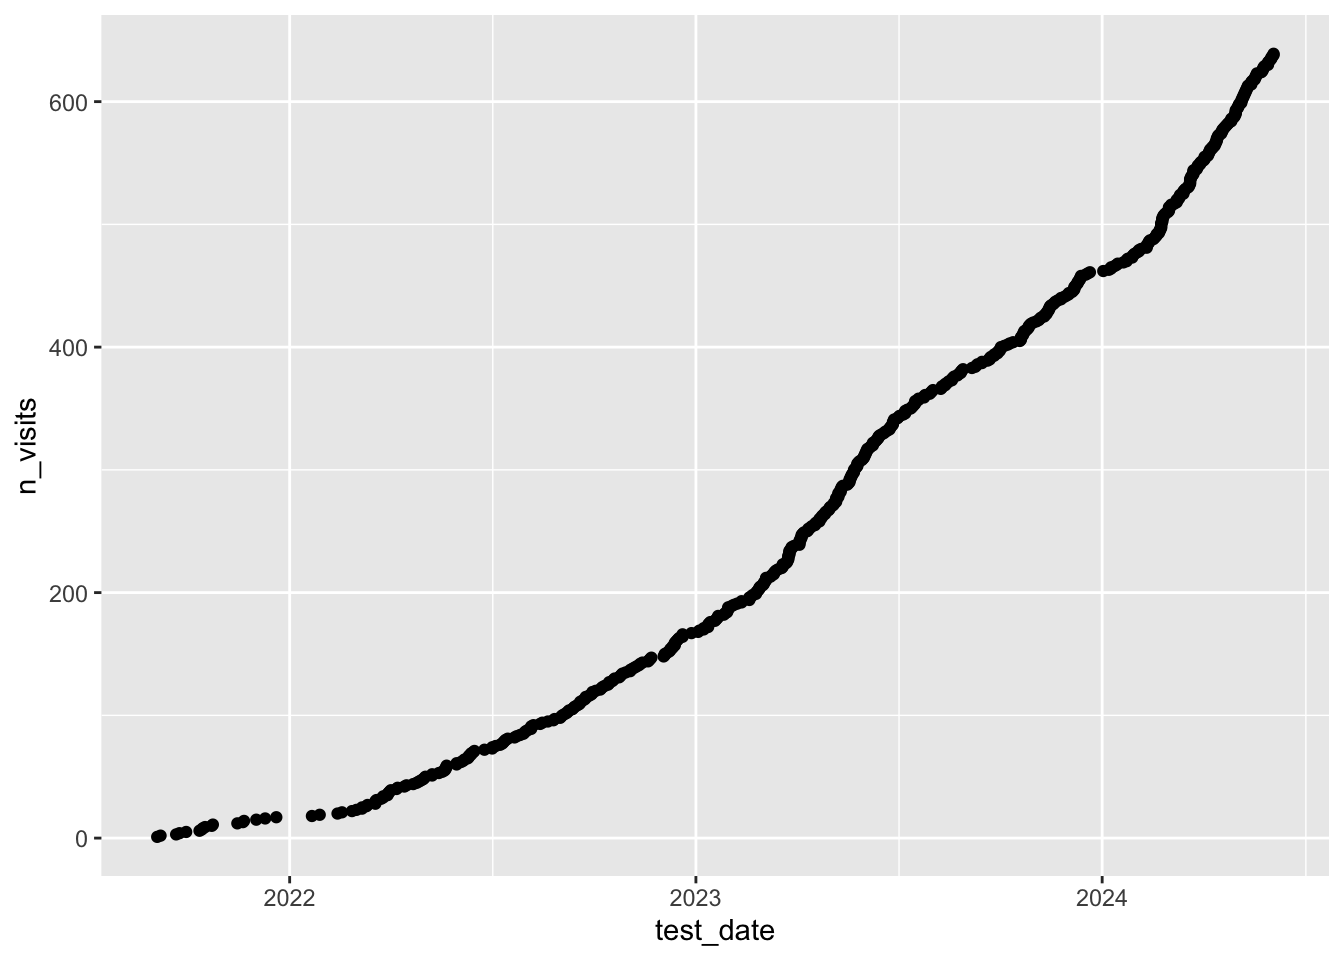 Cumulative home visits by year